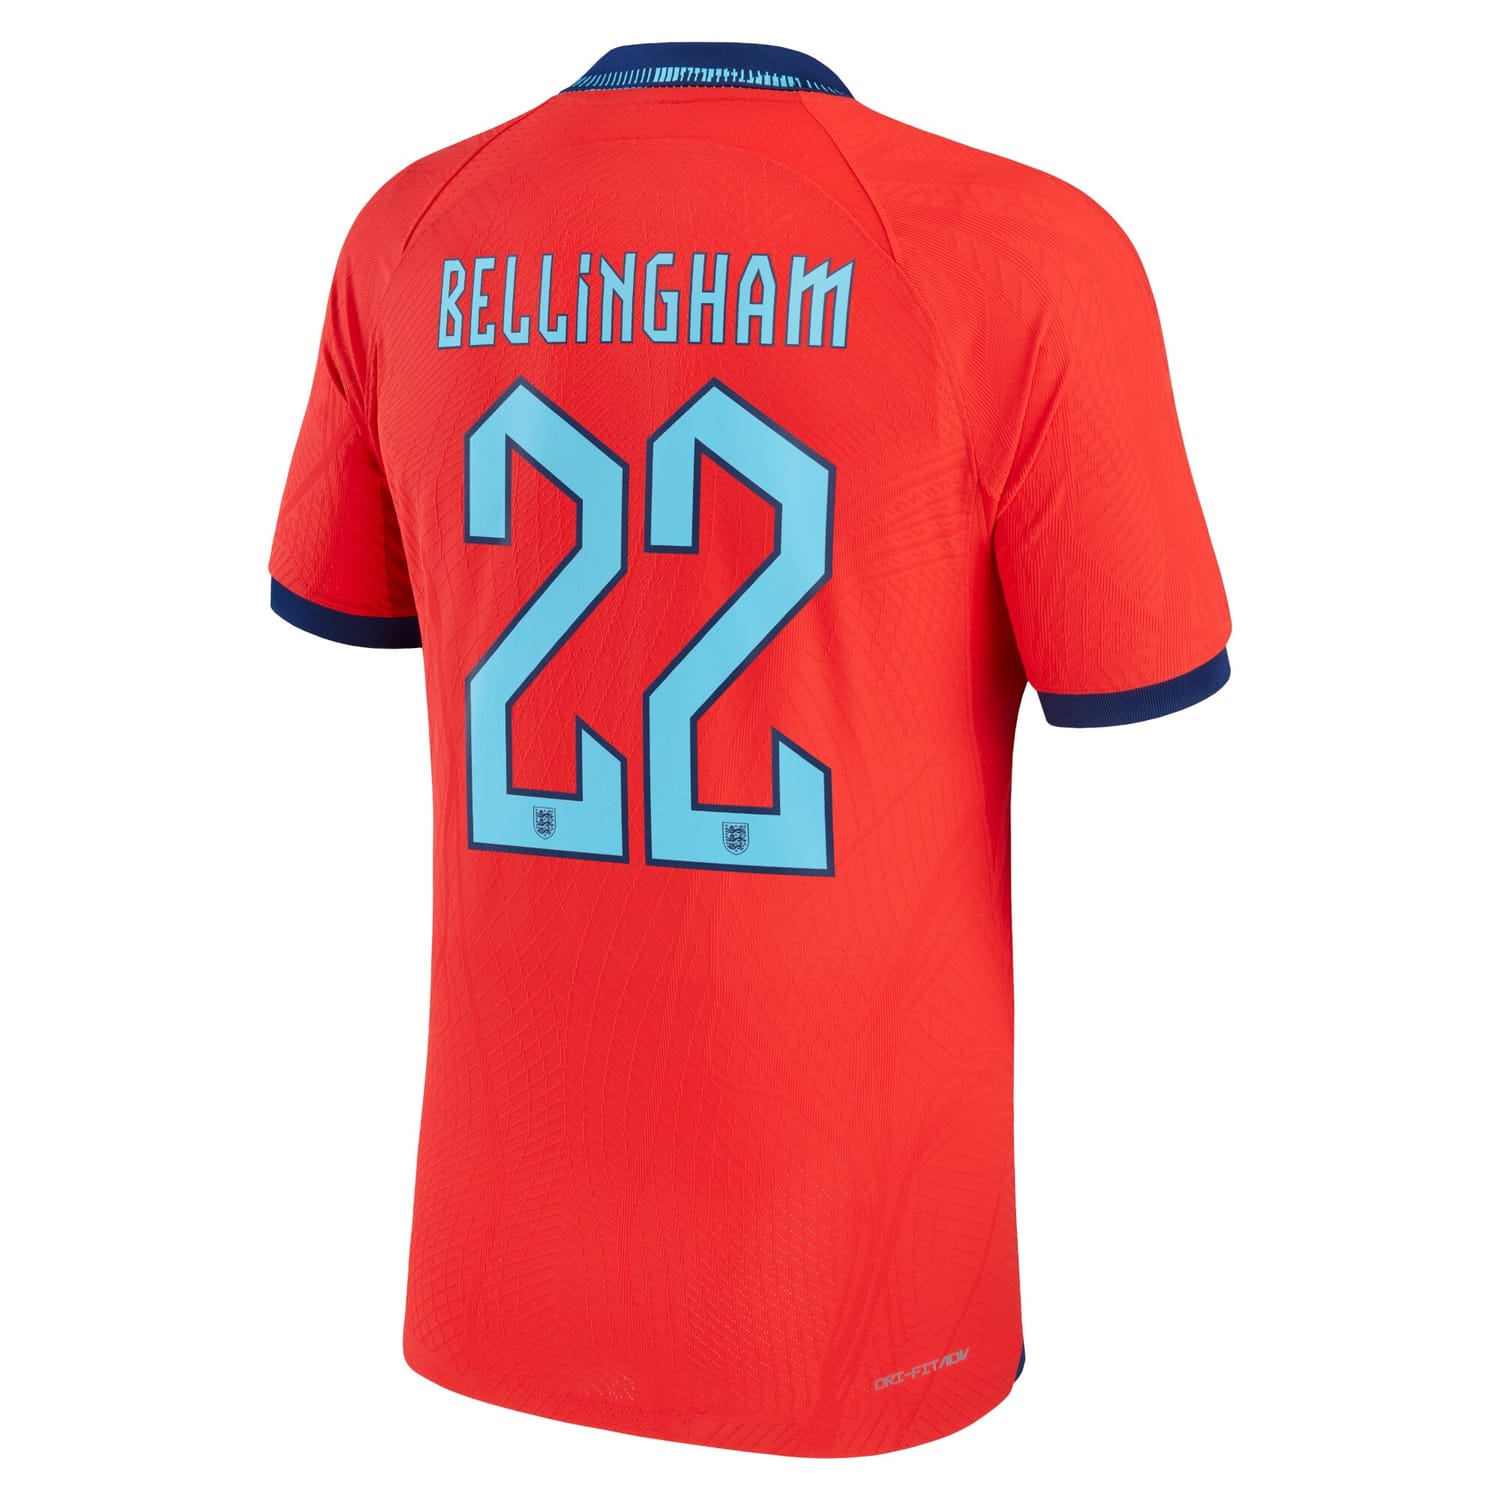 England National Team Away Authentic Jersey Shirt 2022 player Jude Bellingham 22 printing for Men